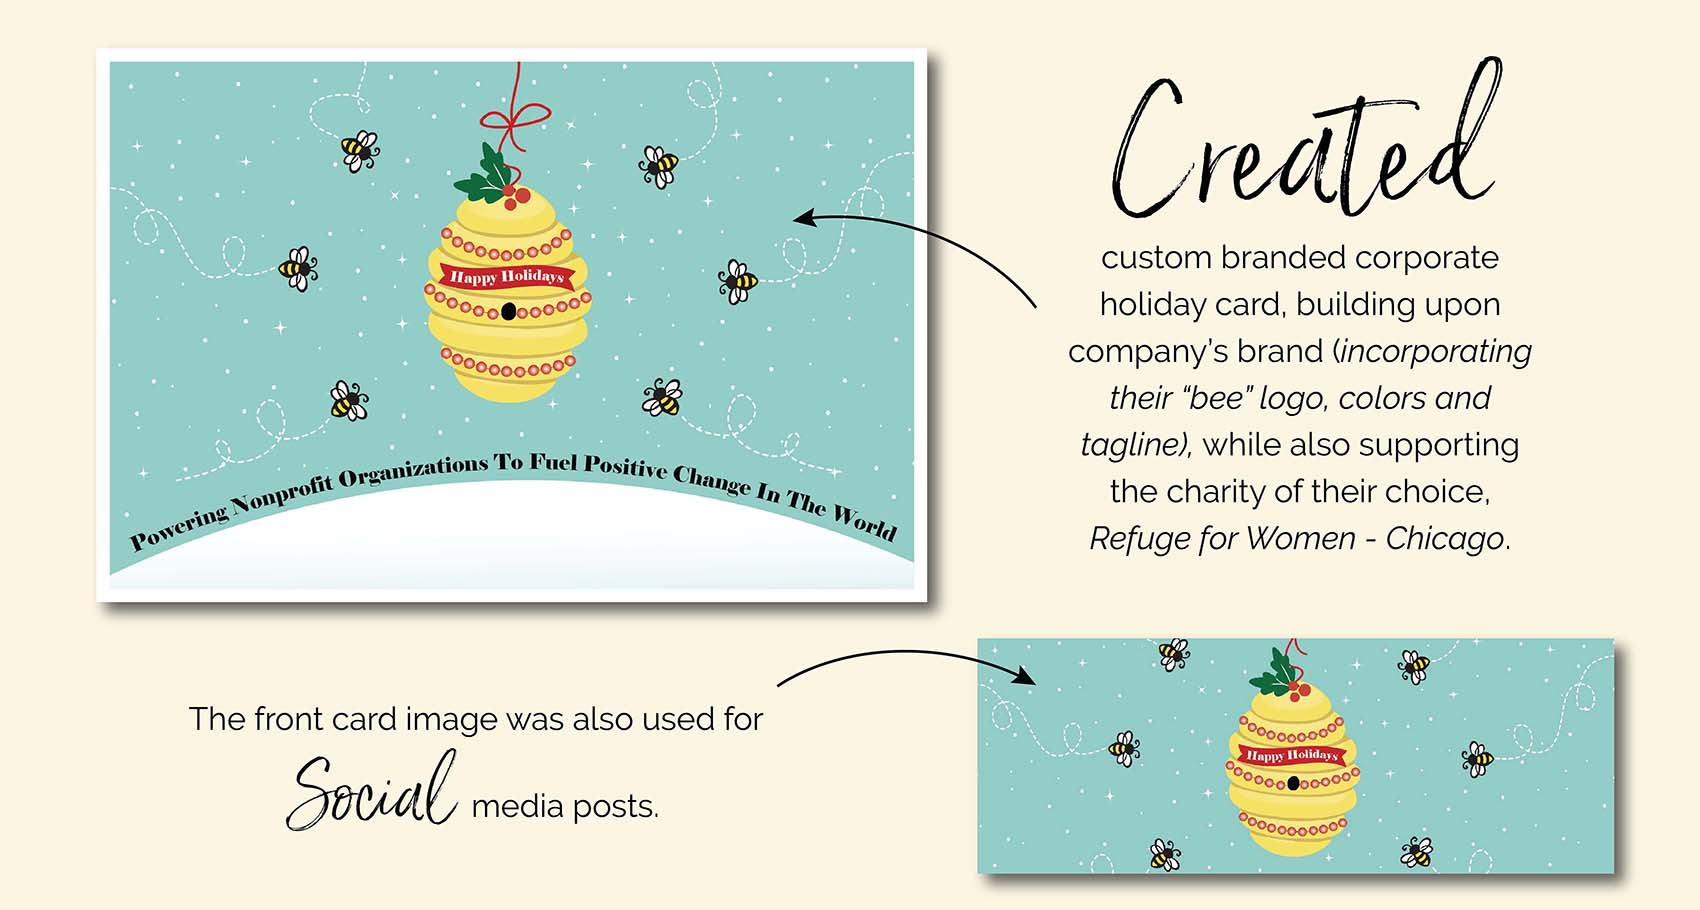 2016 Big Buzz Charity Holiday Card Design by Eclectik Design